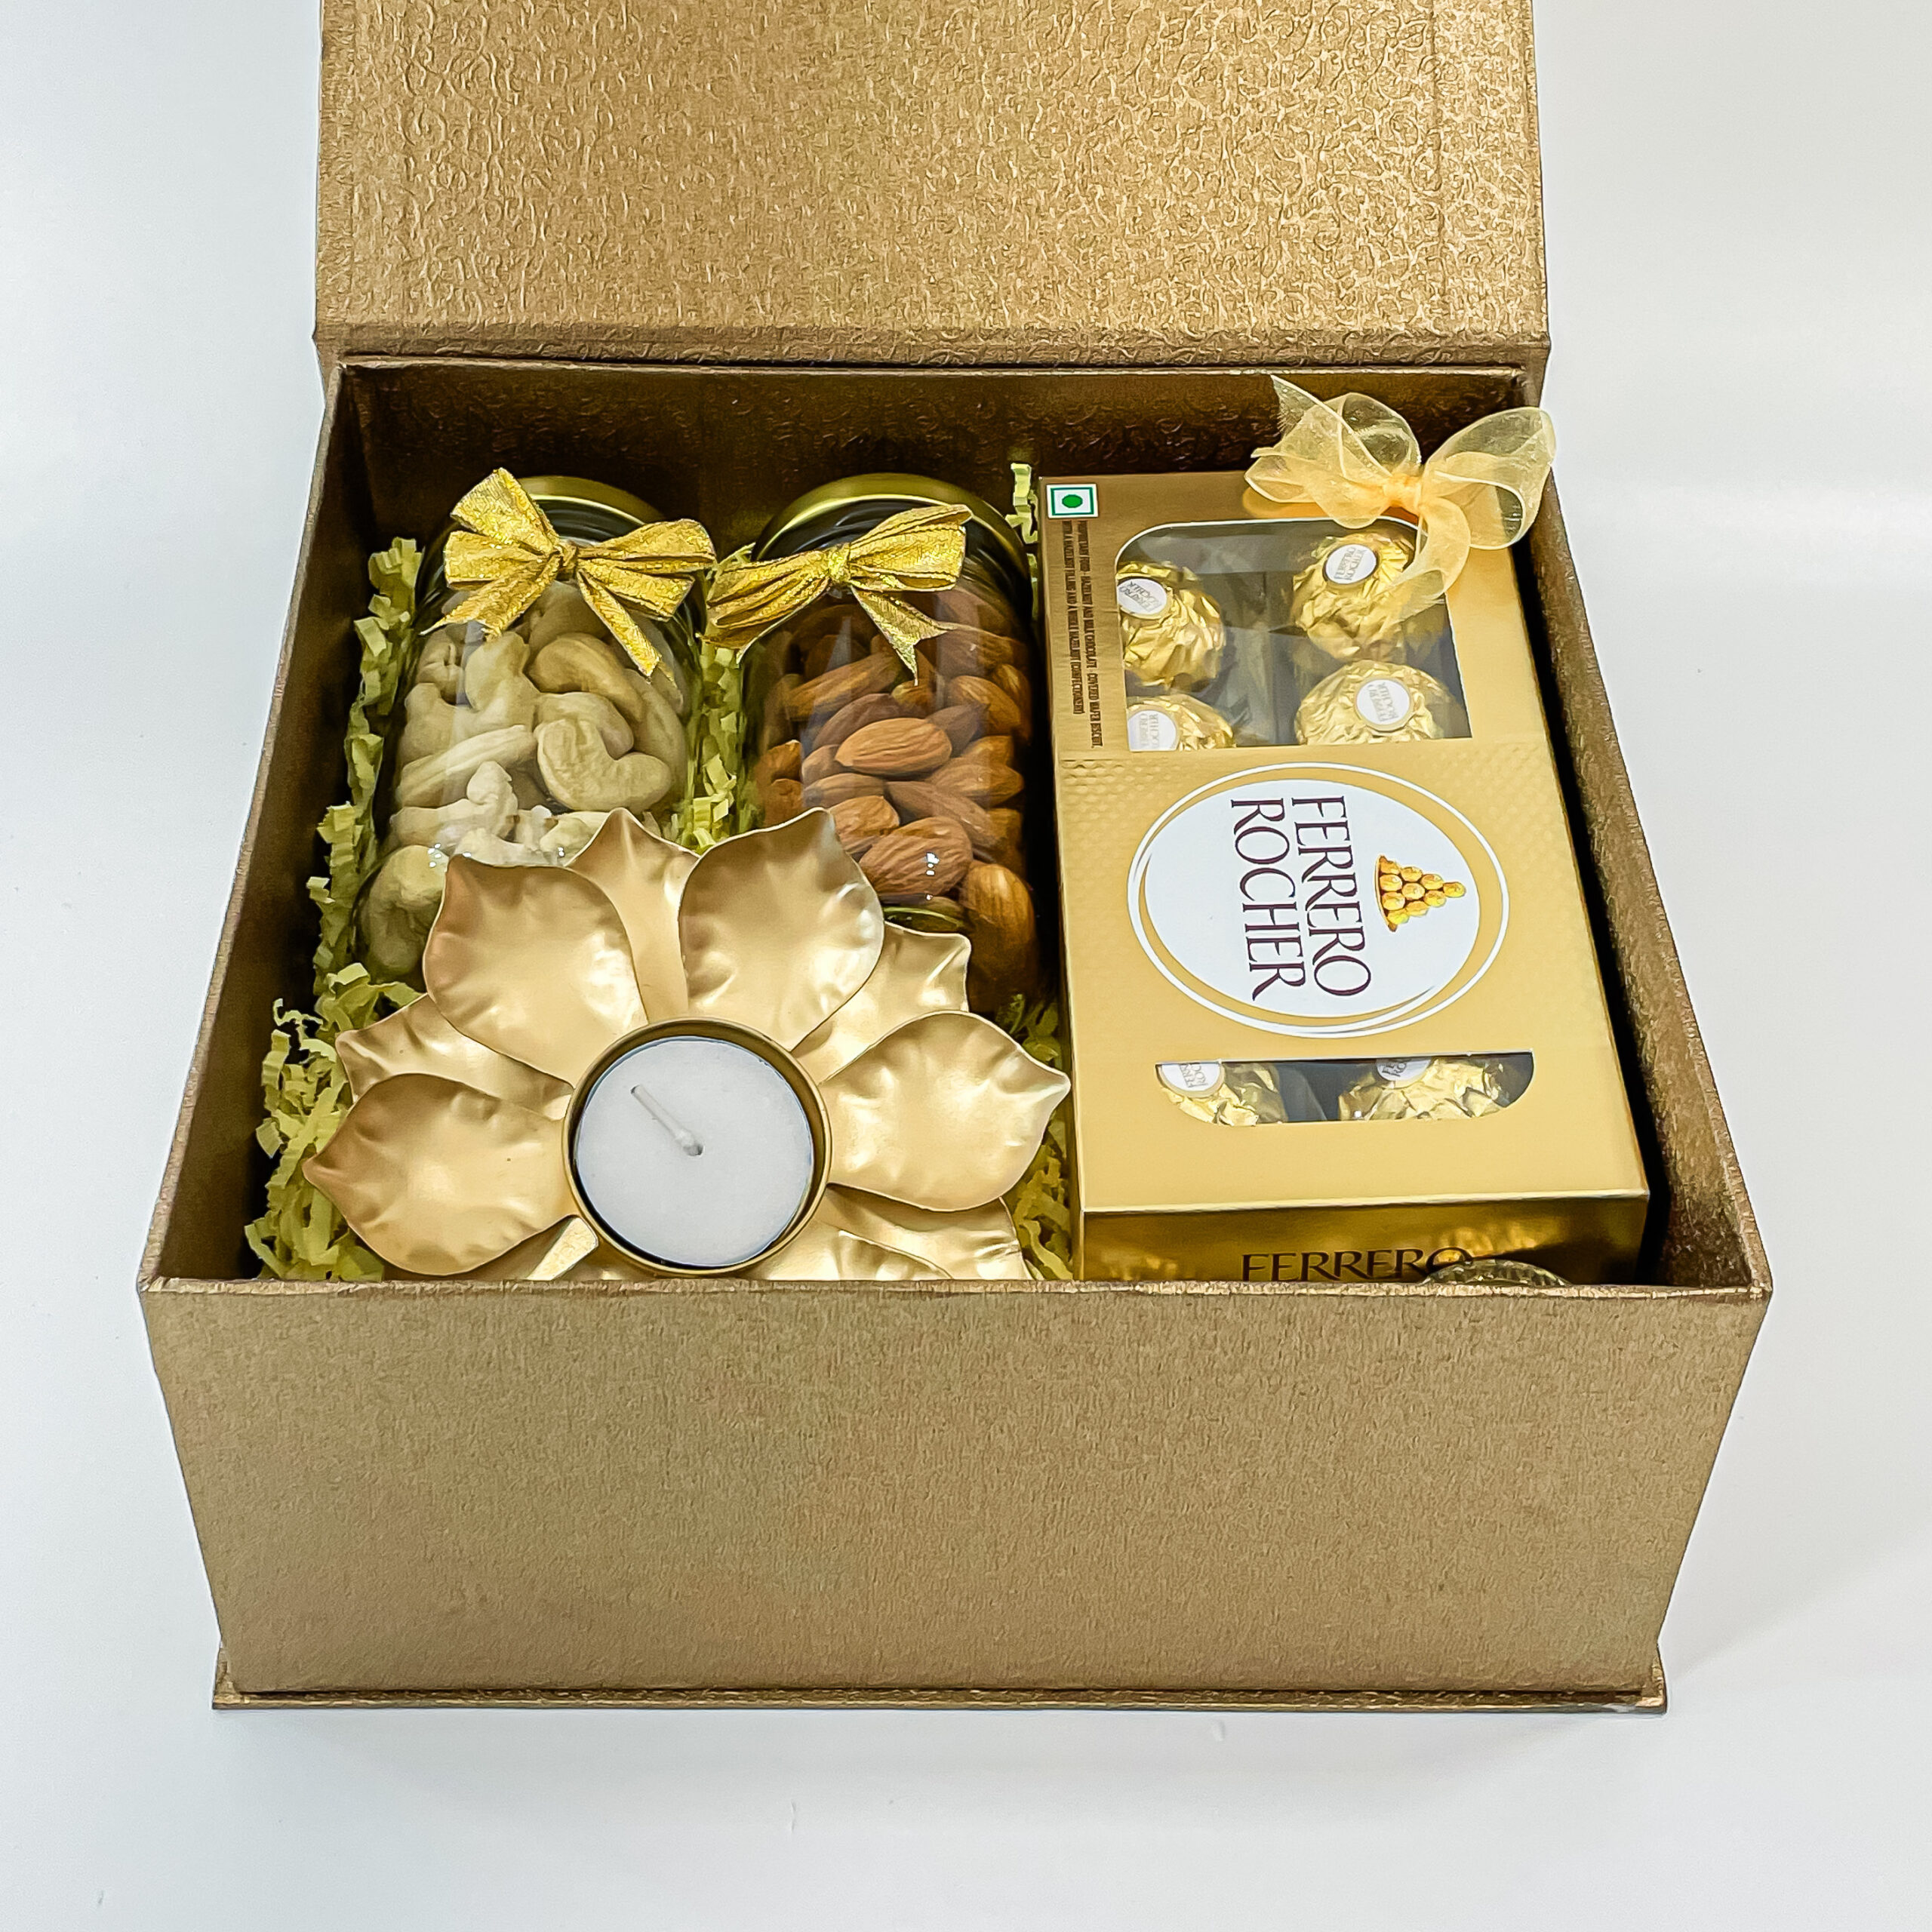 Hazel & Creme Chocolate Cookie Gift Box - Chocolate Covered Cookies Gift  Basket - Easter Gourmet Gifts | Bigbigmart.com